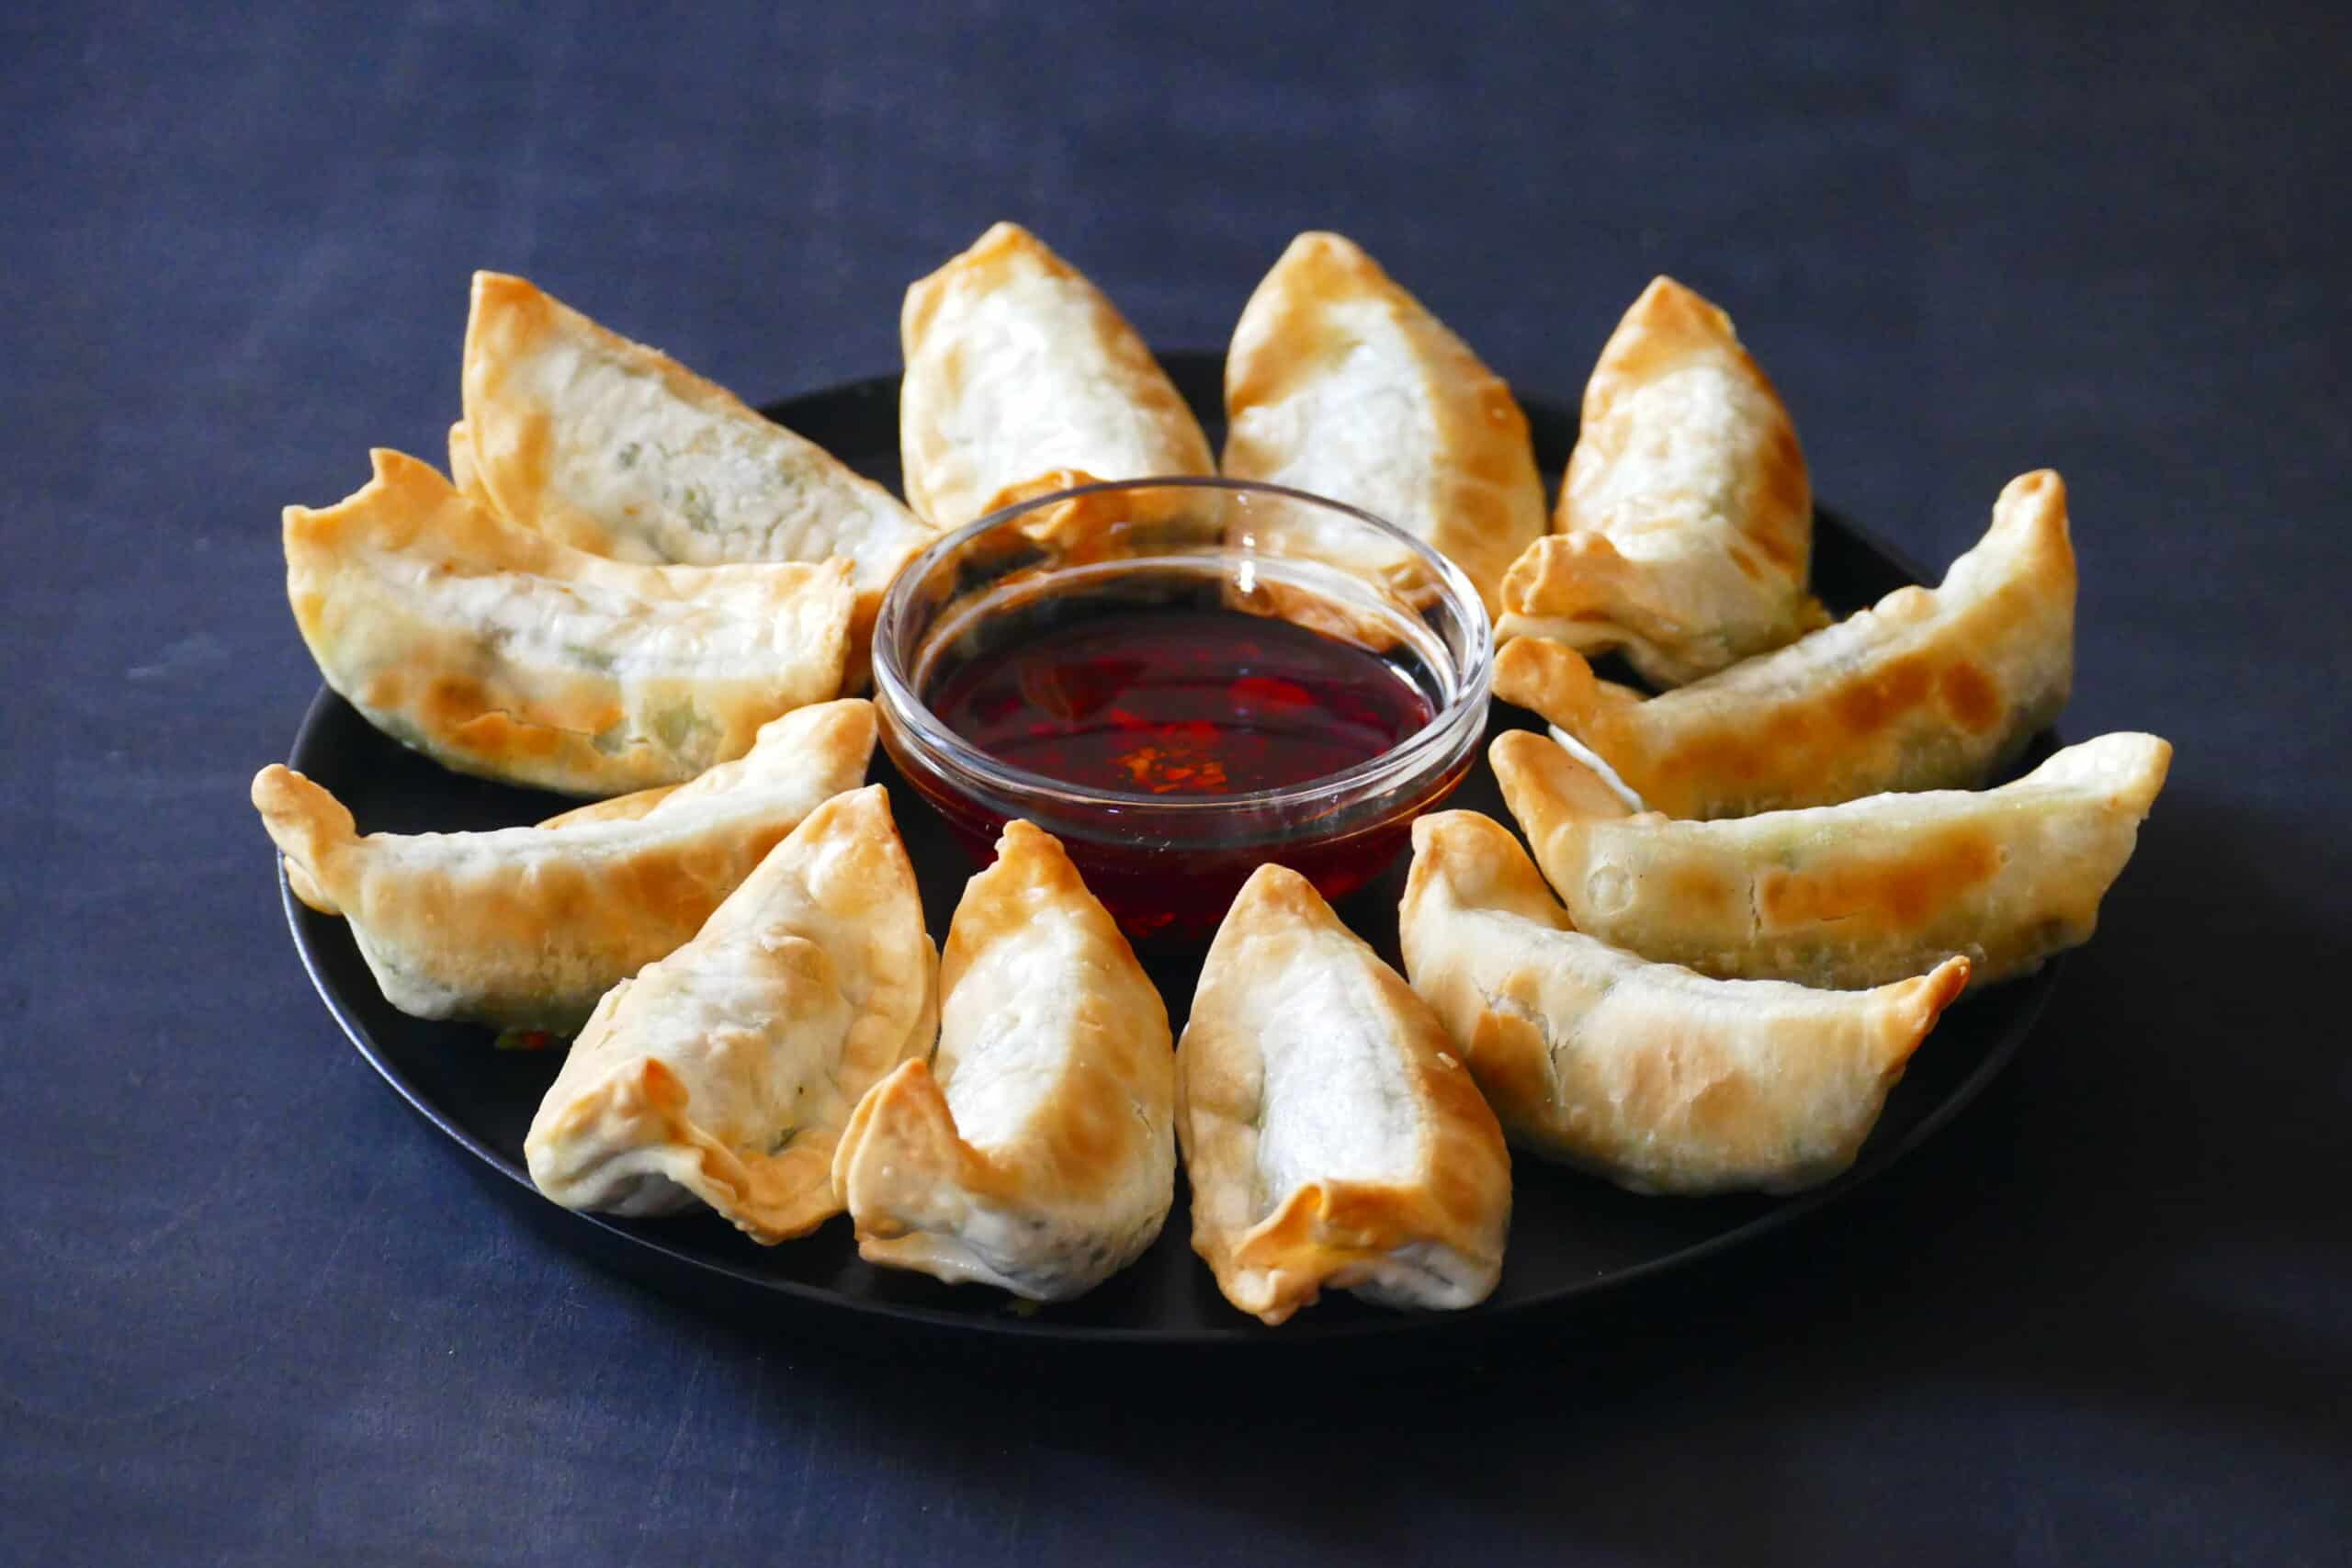 Golden gyoza potstickers in a circle with chili sauce in the middle